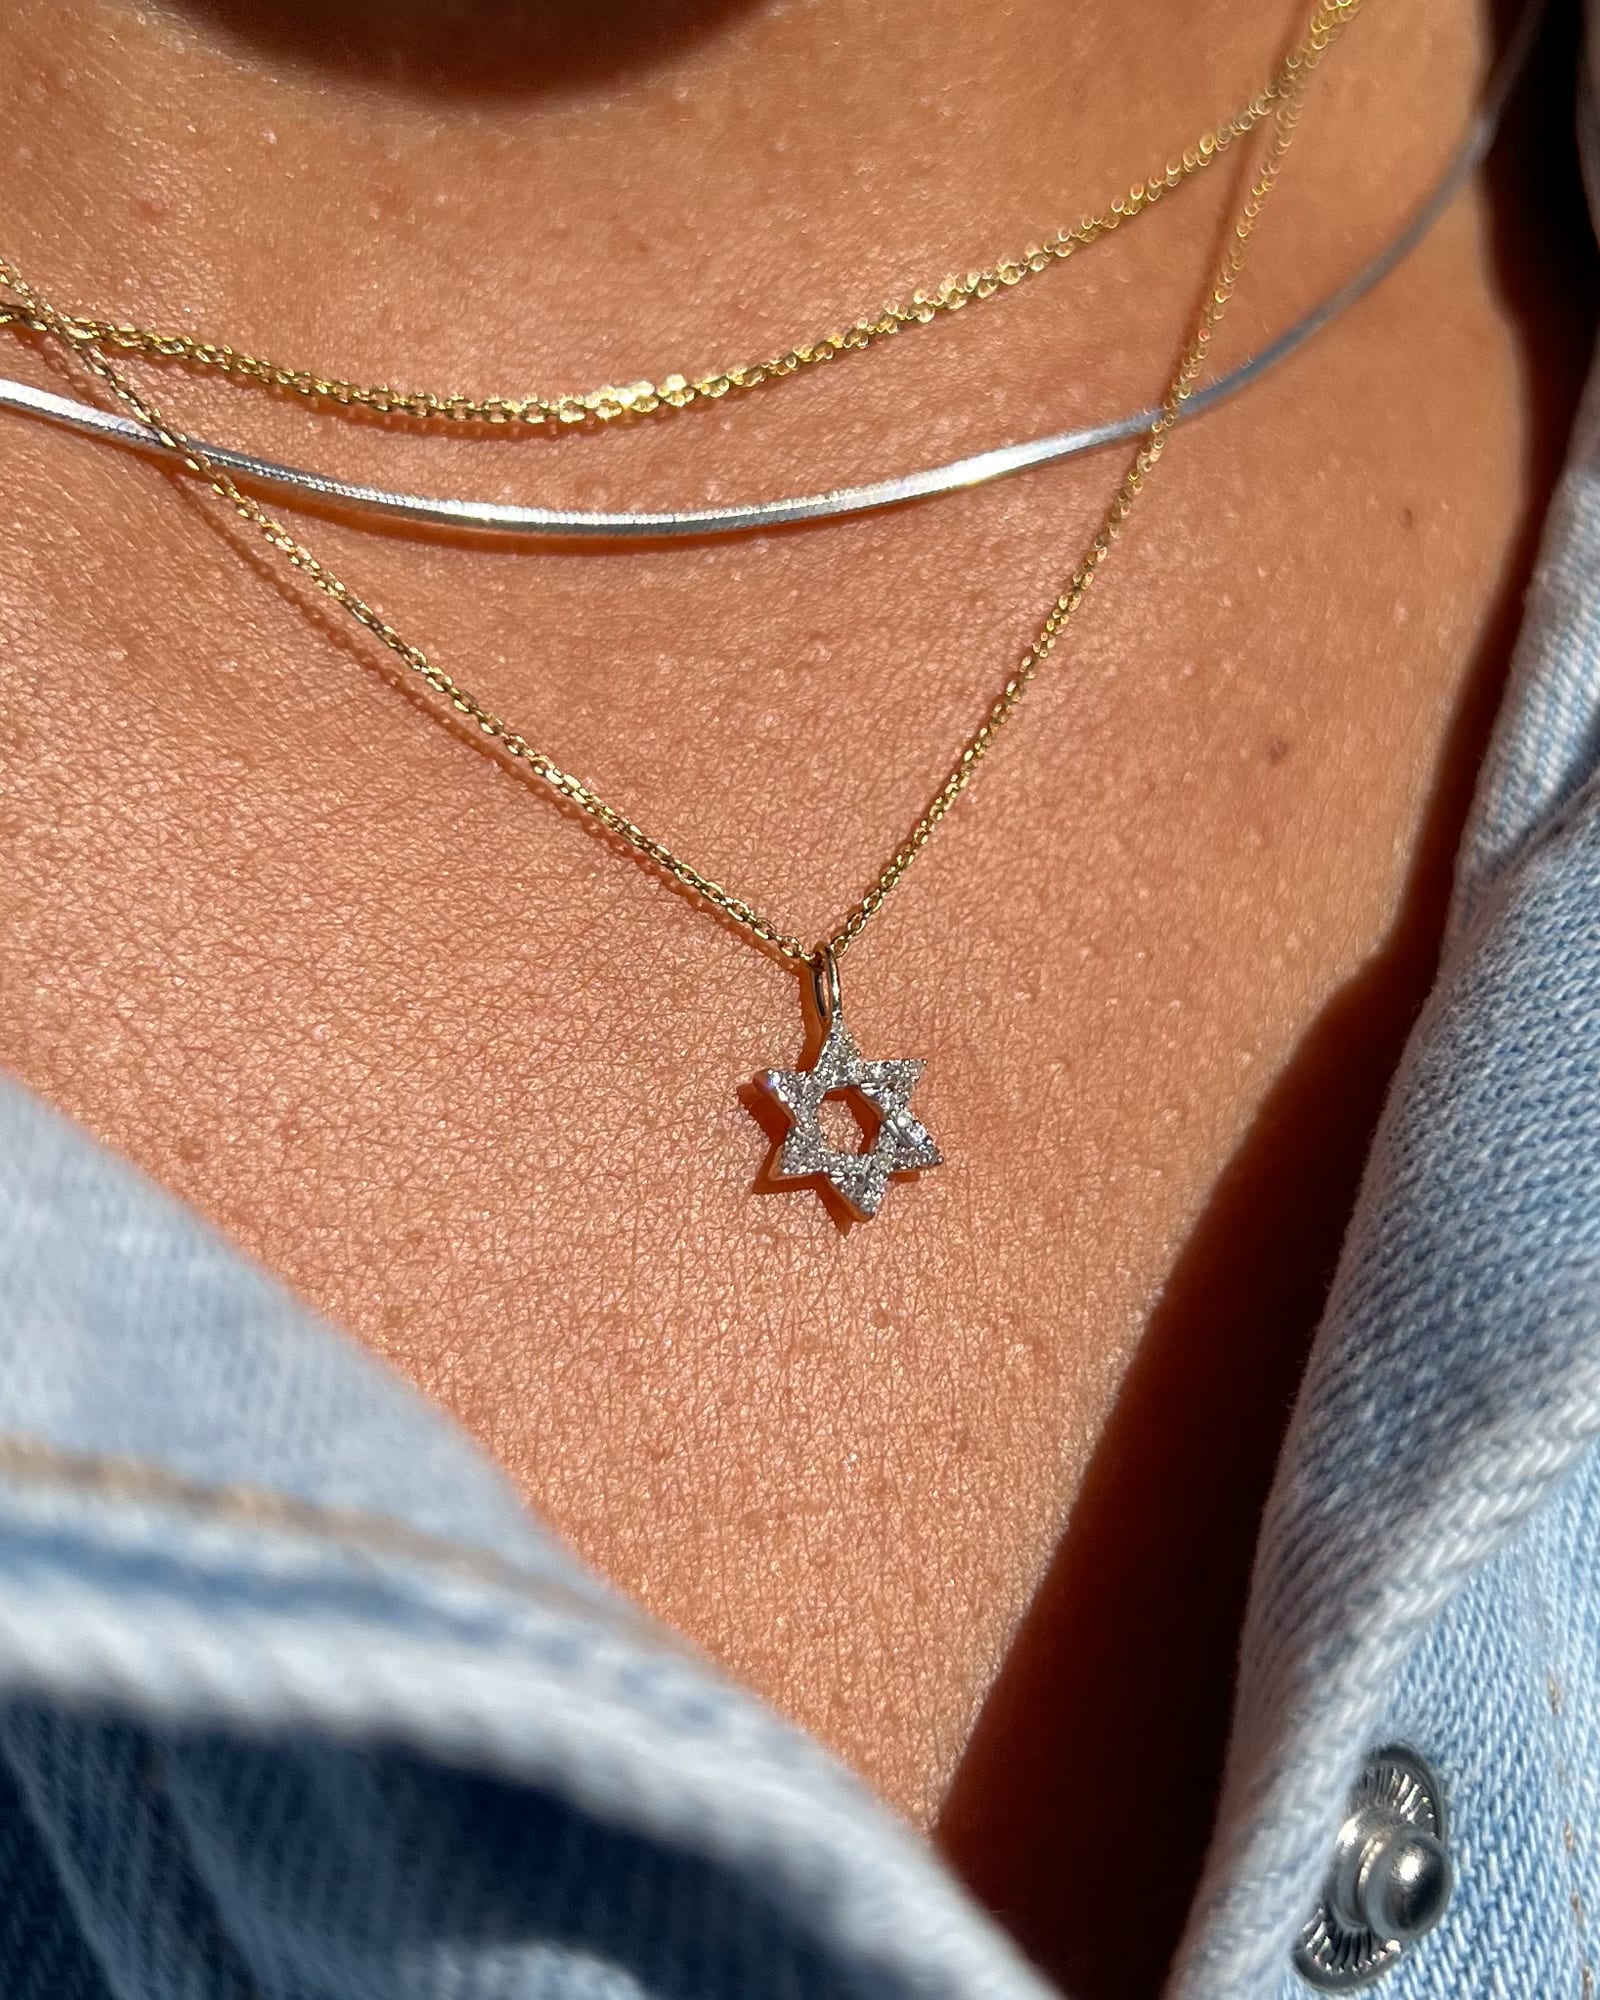 Deluxe 14K Gold Star of David Pendant Necklace, Jewish Jewelry